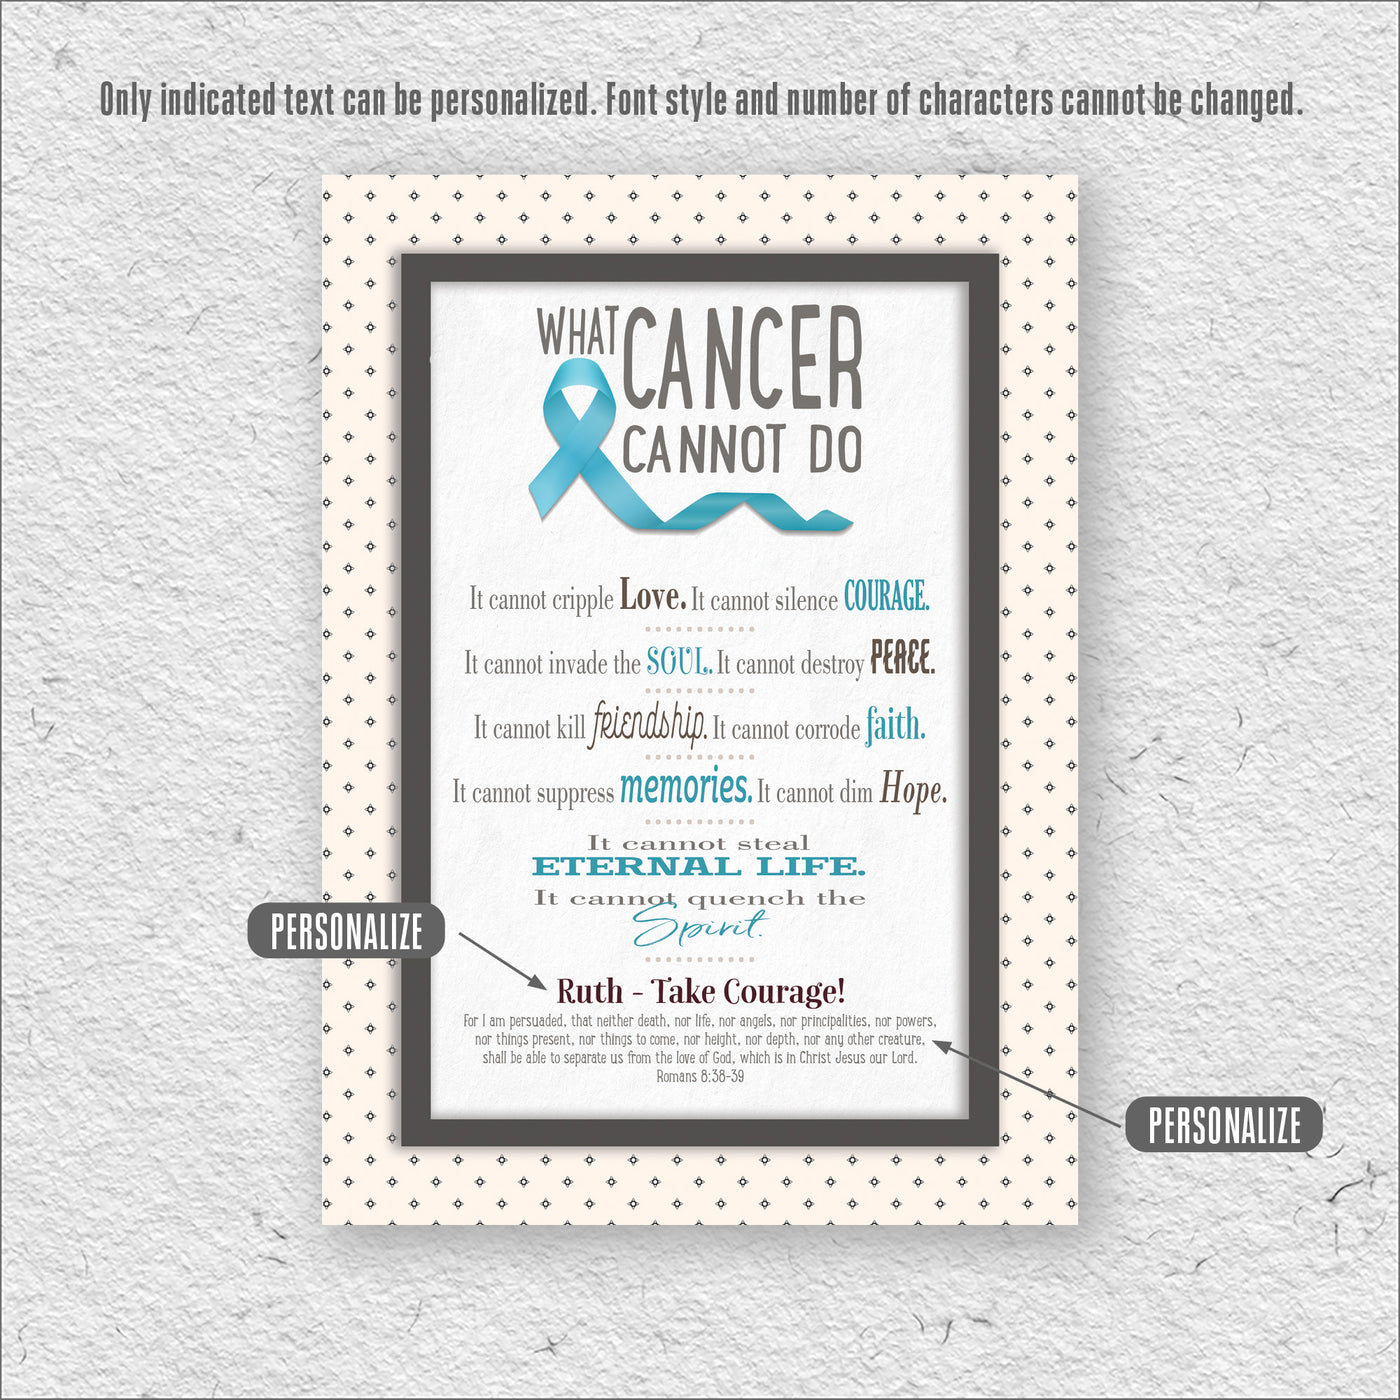 What Cancer Cannot Do | Personalized Cancer Encouragement Print, Wall Decor - Blue Ribbon